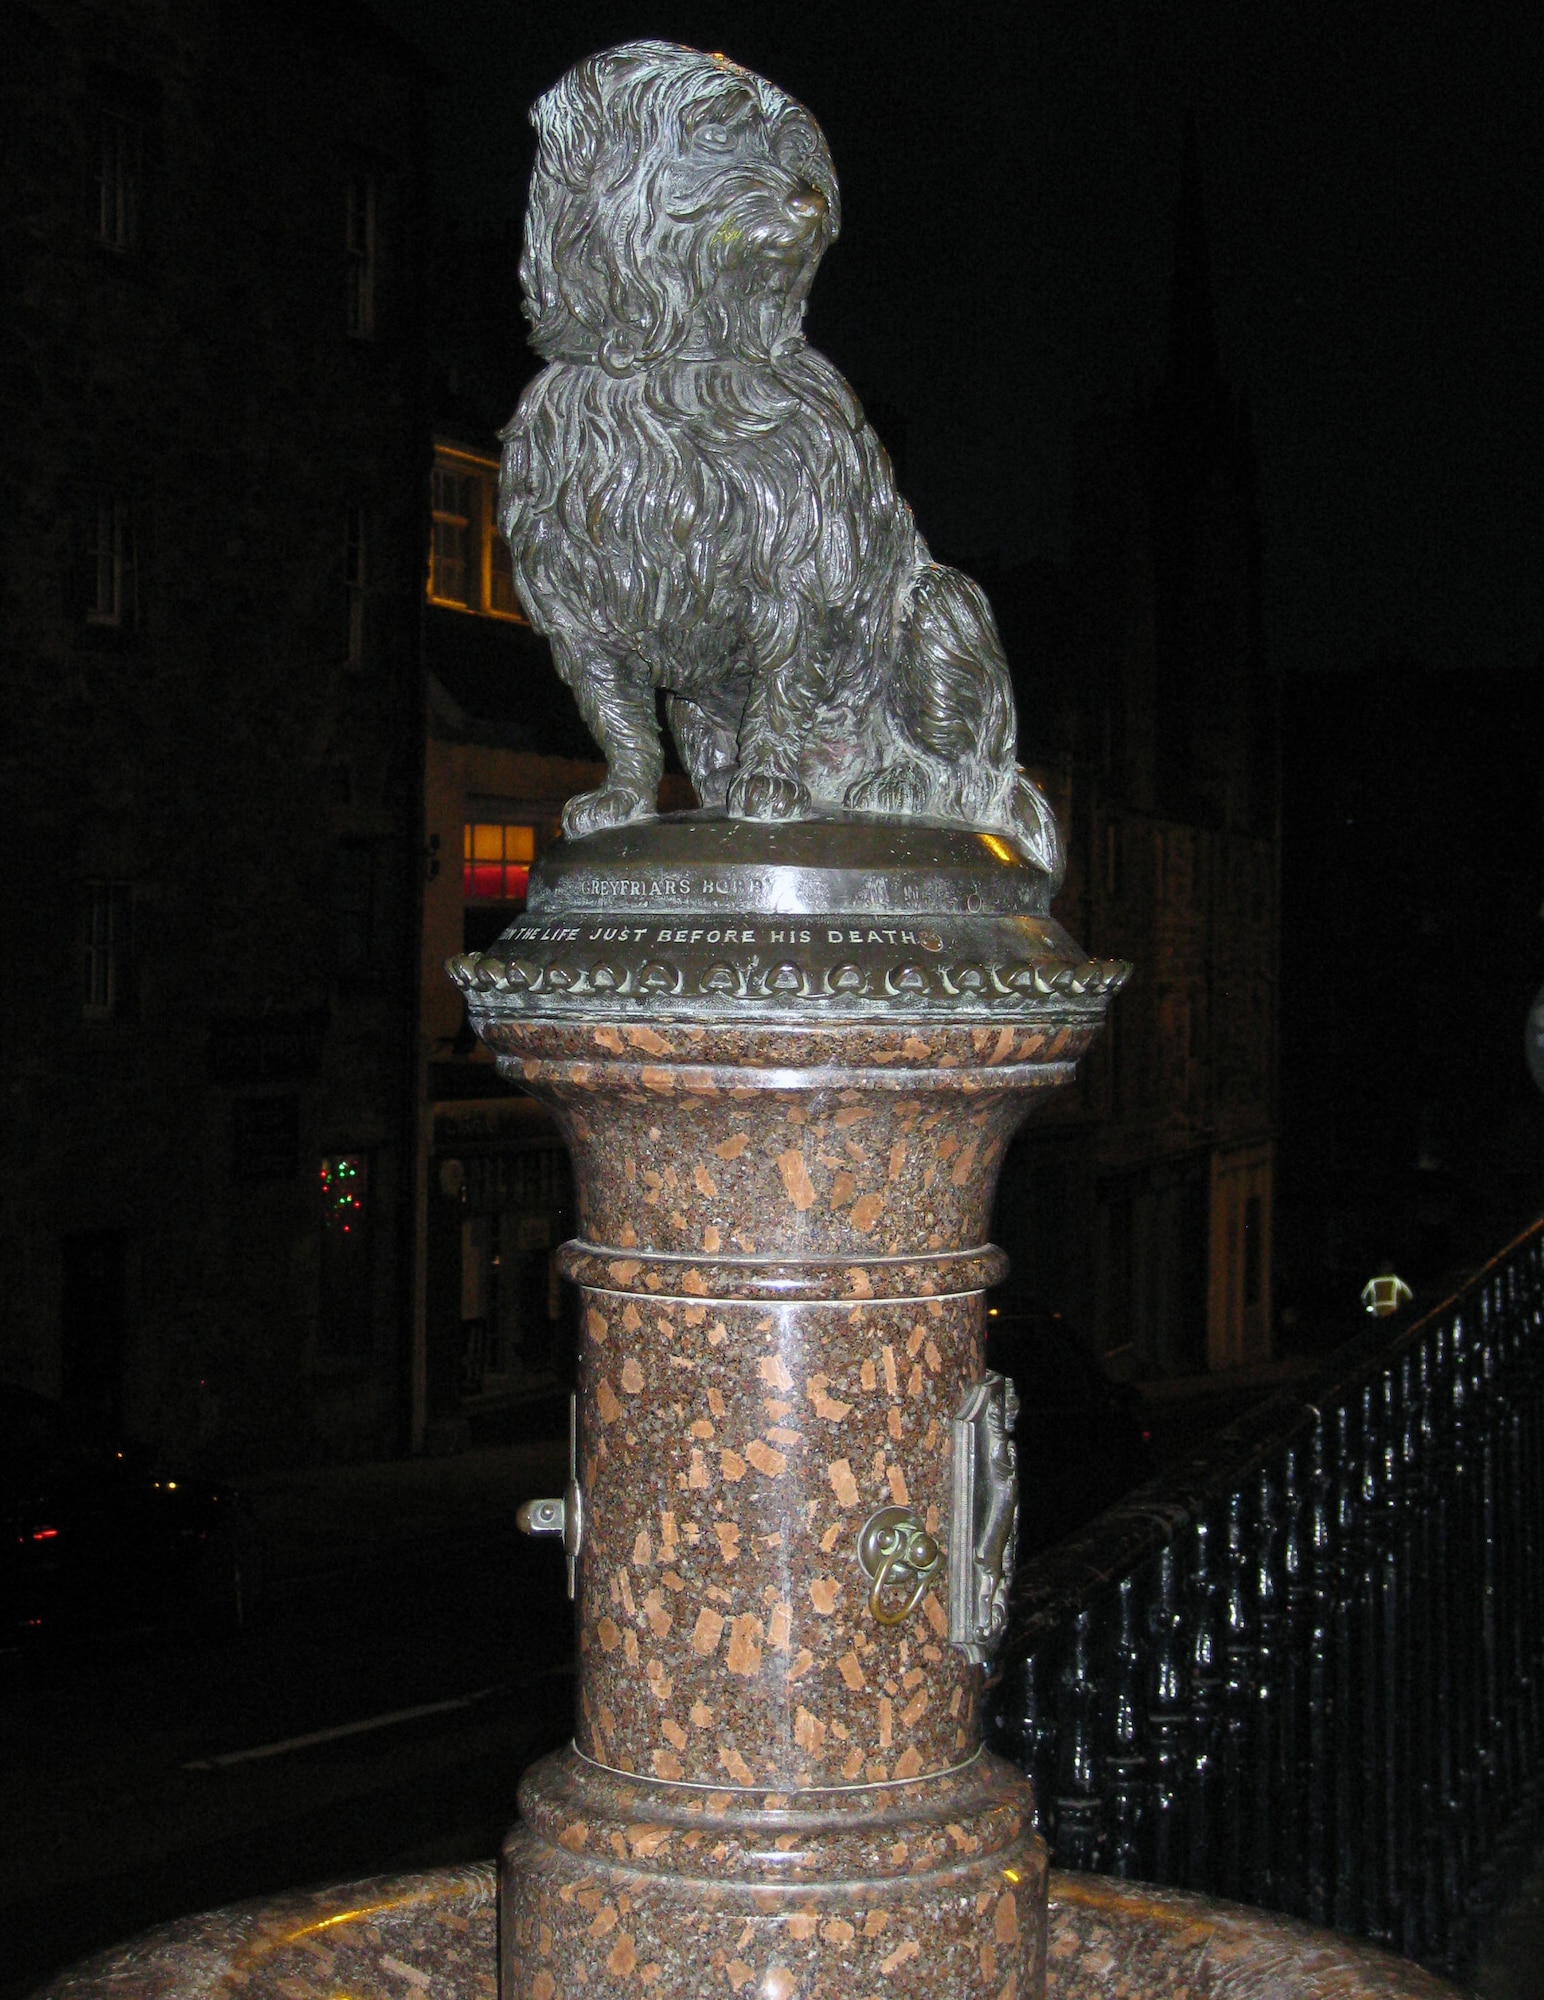 Greyfriars Bobby remained loyal to his master, John Gray, even after John's death in 1858. For 14 years, faithful Bobby kept constant watch over the grave until his own death on Jan 14, 1872. William Brodie sculpted this life-sized statue of Greyfriars Bobby, and it was unveiled without ceremony in November 1873, opposite Greyfriars Kirkyard. It sits at the corner of Edinburgh's Candlemaker Row and George IV Bridge so that Scotland’s capital city will always remember its most famous and faithful dog. (U.S. Air Force photo by Staff Sgt. Megan Lyon)